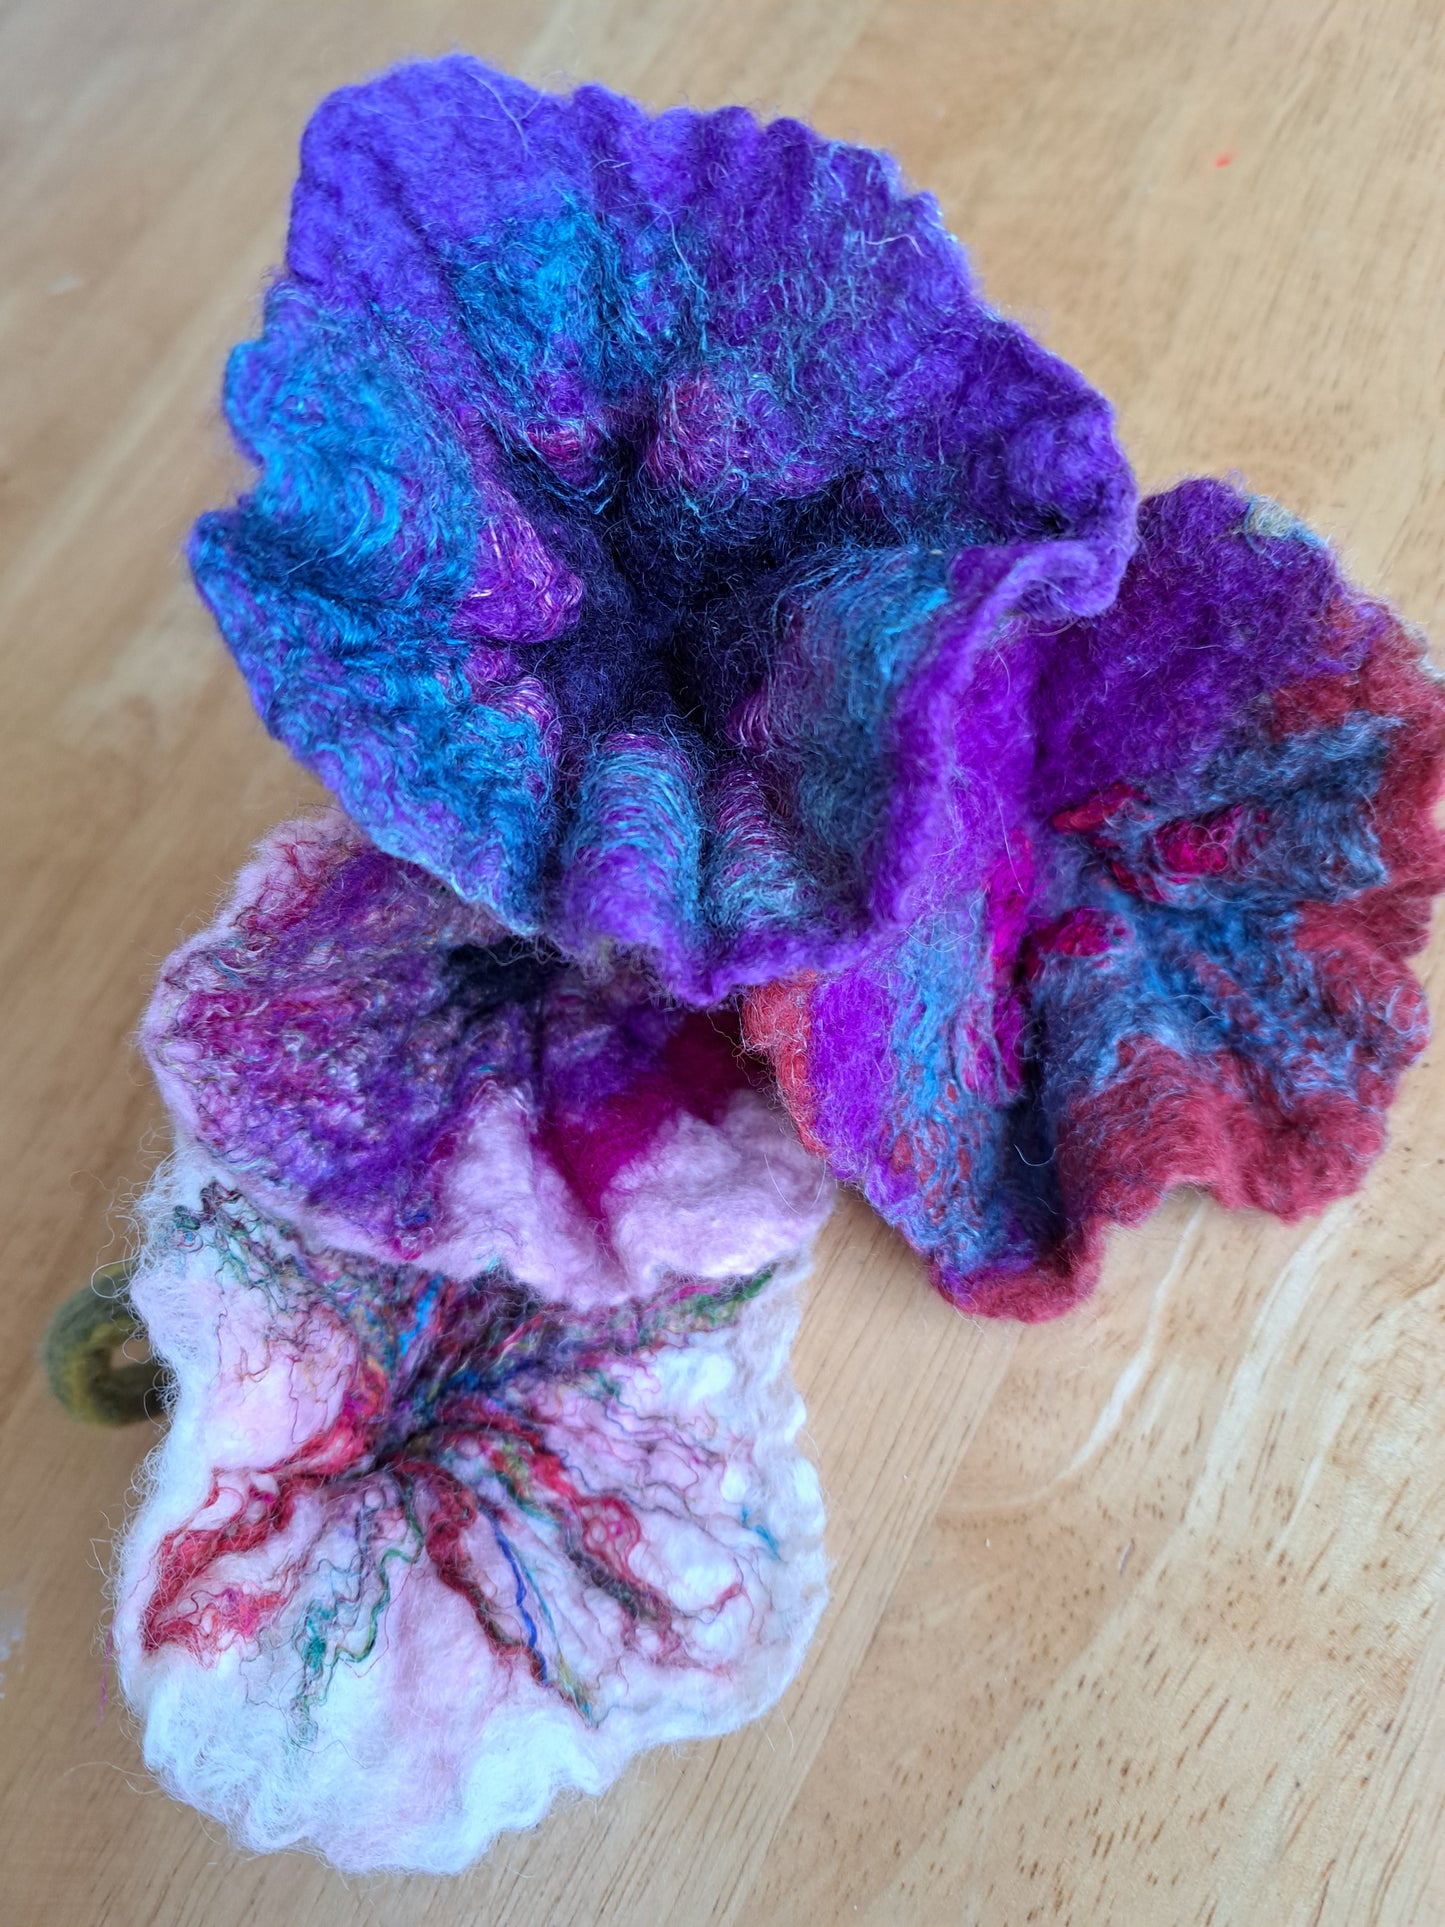 Introduction to wet felting